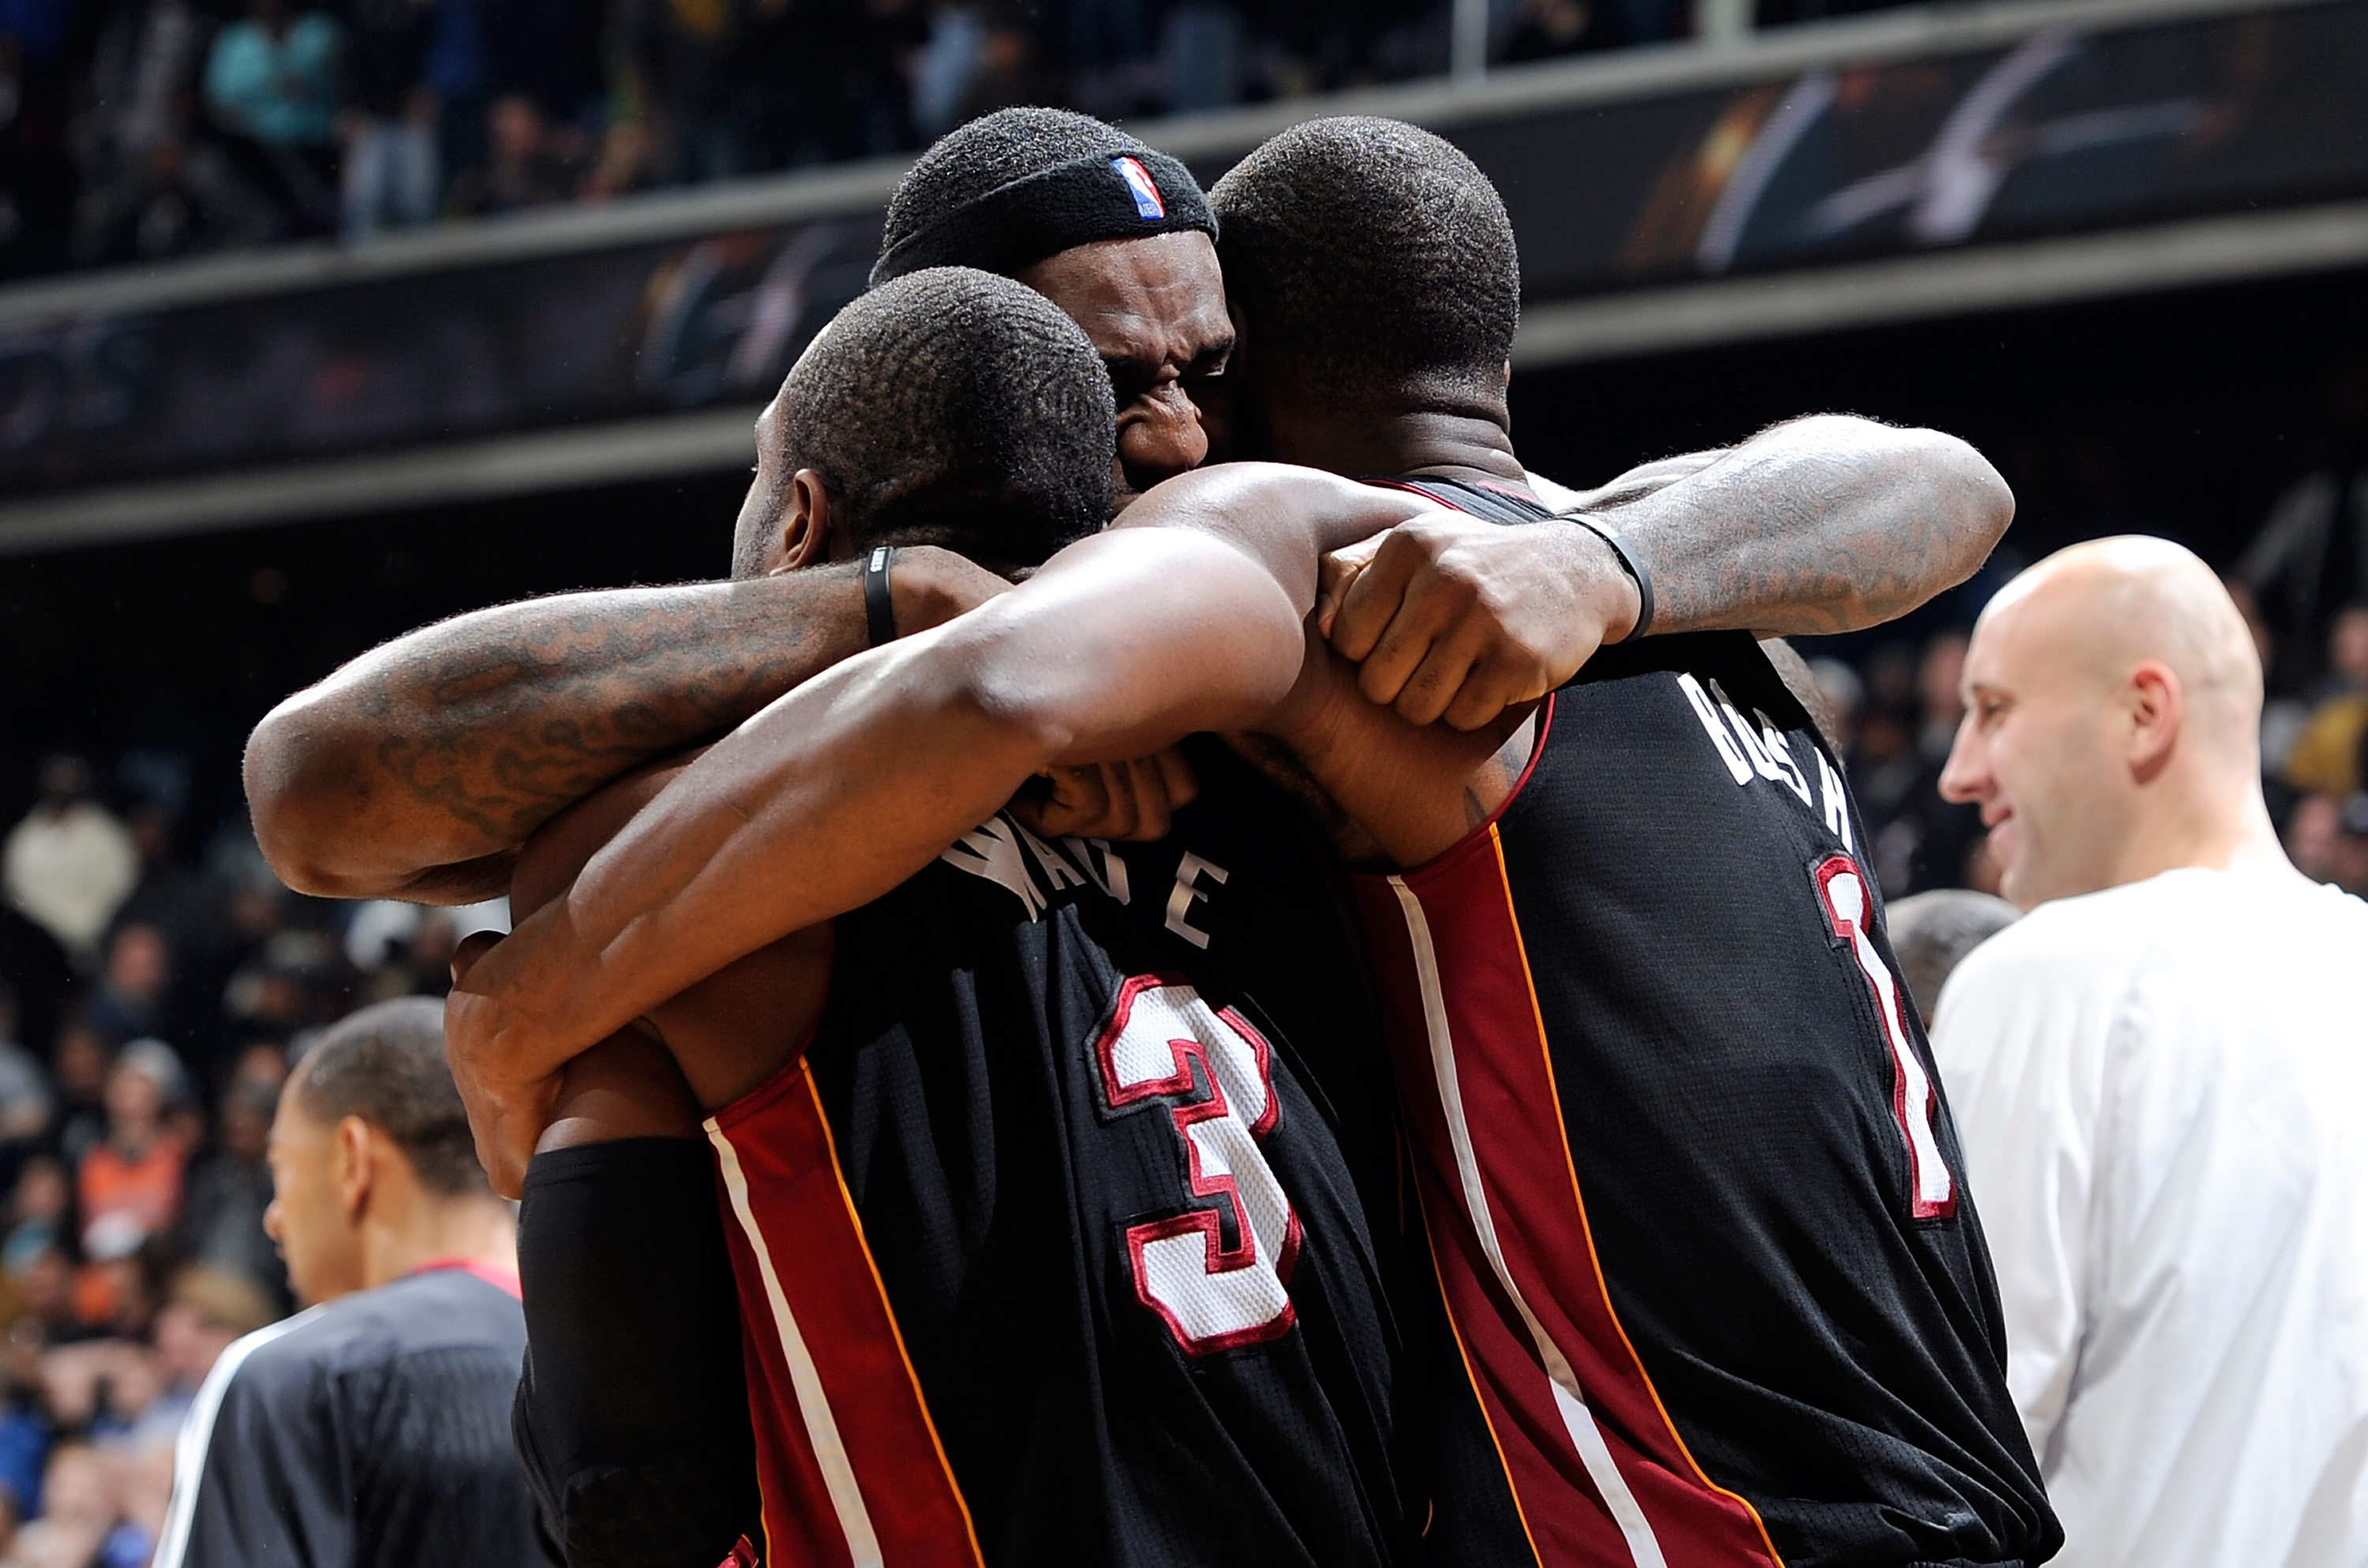 WASHINGTON, DC - DECEMBER 18:  LeBron James #6 of the Miami Heat celebrates with Dwyane Wade #3 and Chris Bosh #1 after a 95-94 victory over the Washington Wizards at the Verizon Center on December 18, 2010 in Washington, DC. NOTE TO USER: User expressly